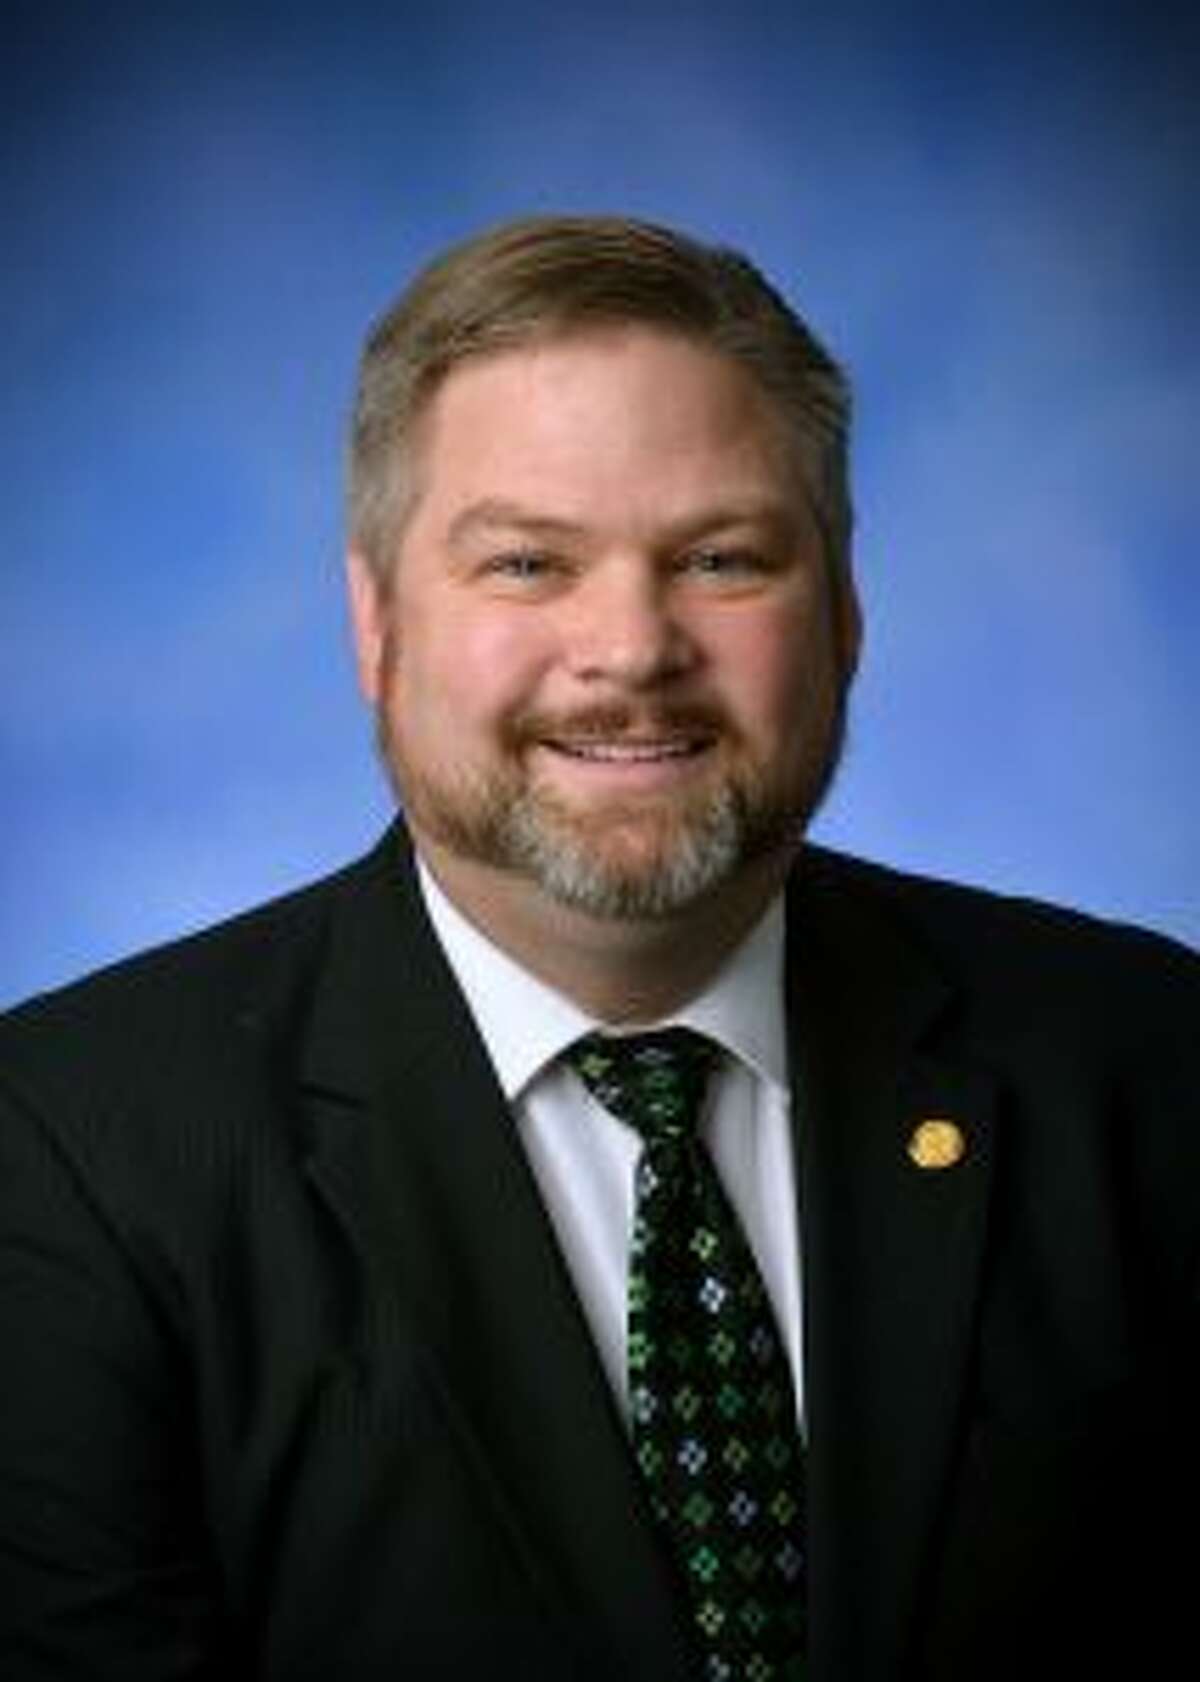 State Representative Phil Green will no longer be Huron County's state representative as of 2023, given that the new redistricting maps put his home of Millington in a different district.